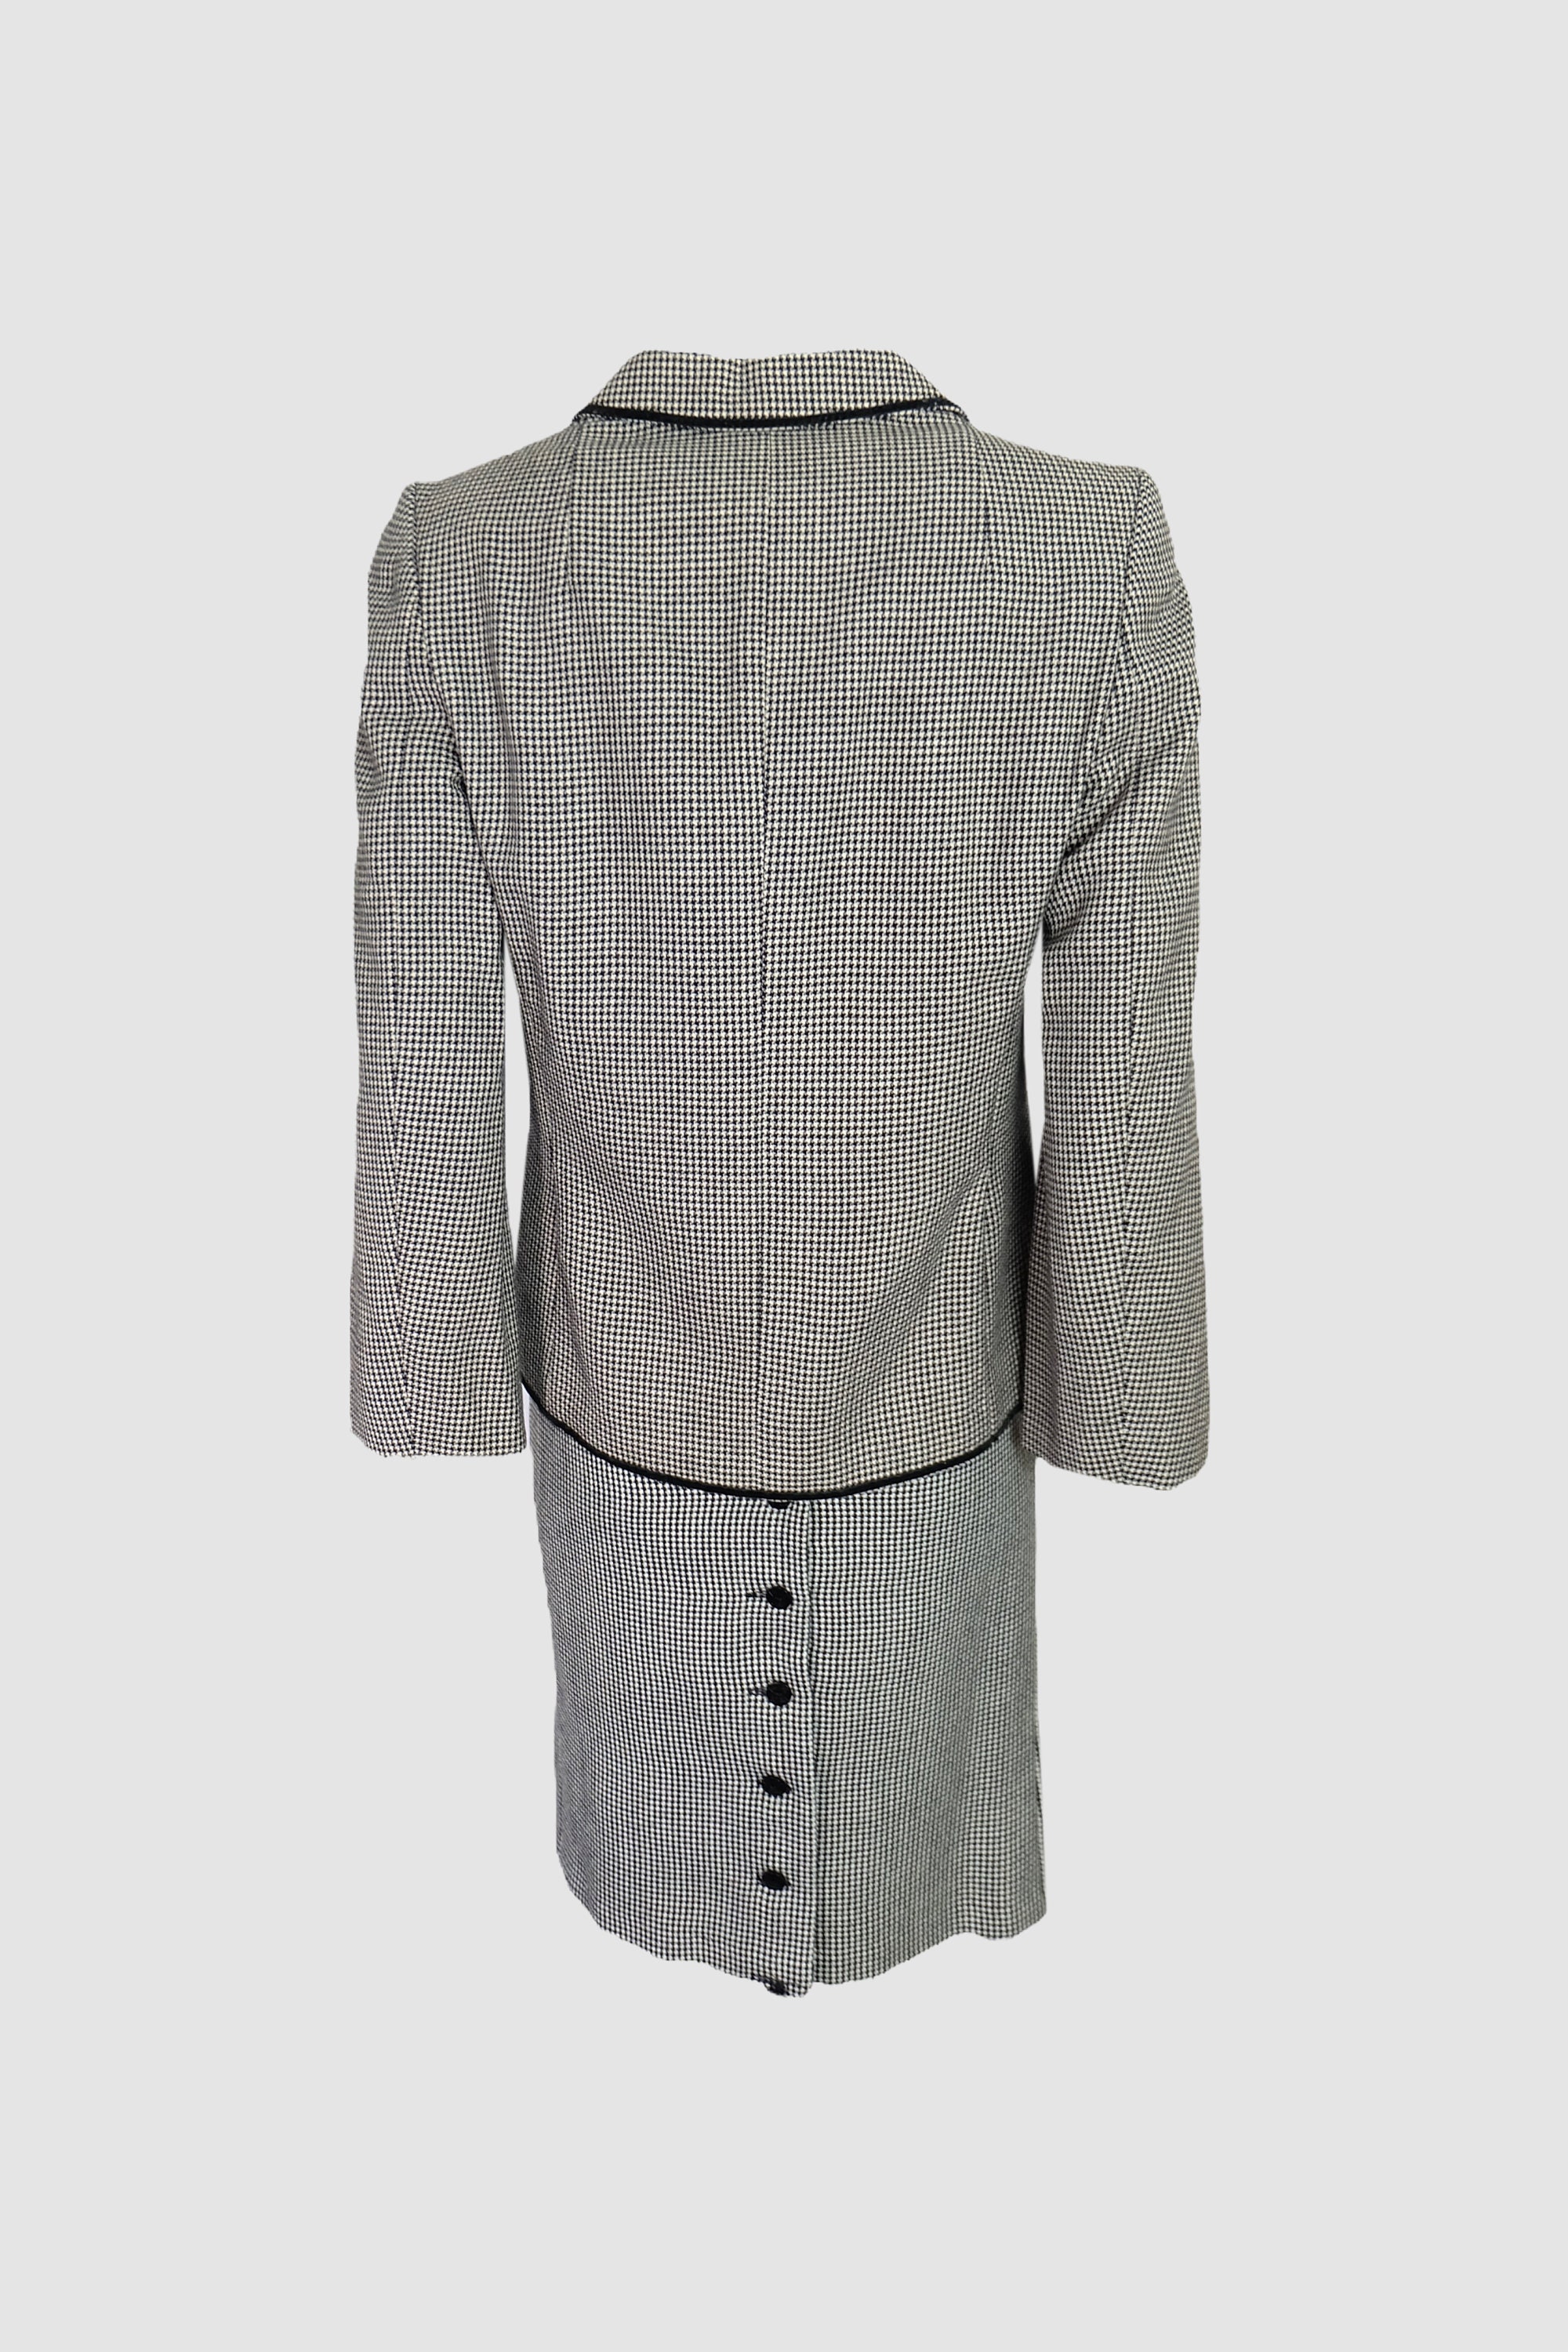 Vintage 60s Black and White Houndstooth Skirt Suit - Etsy UK